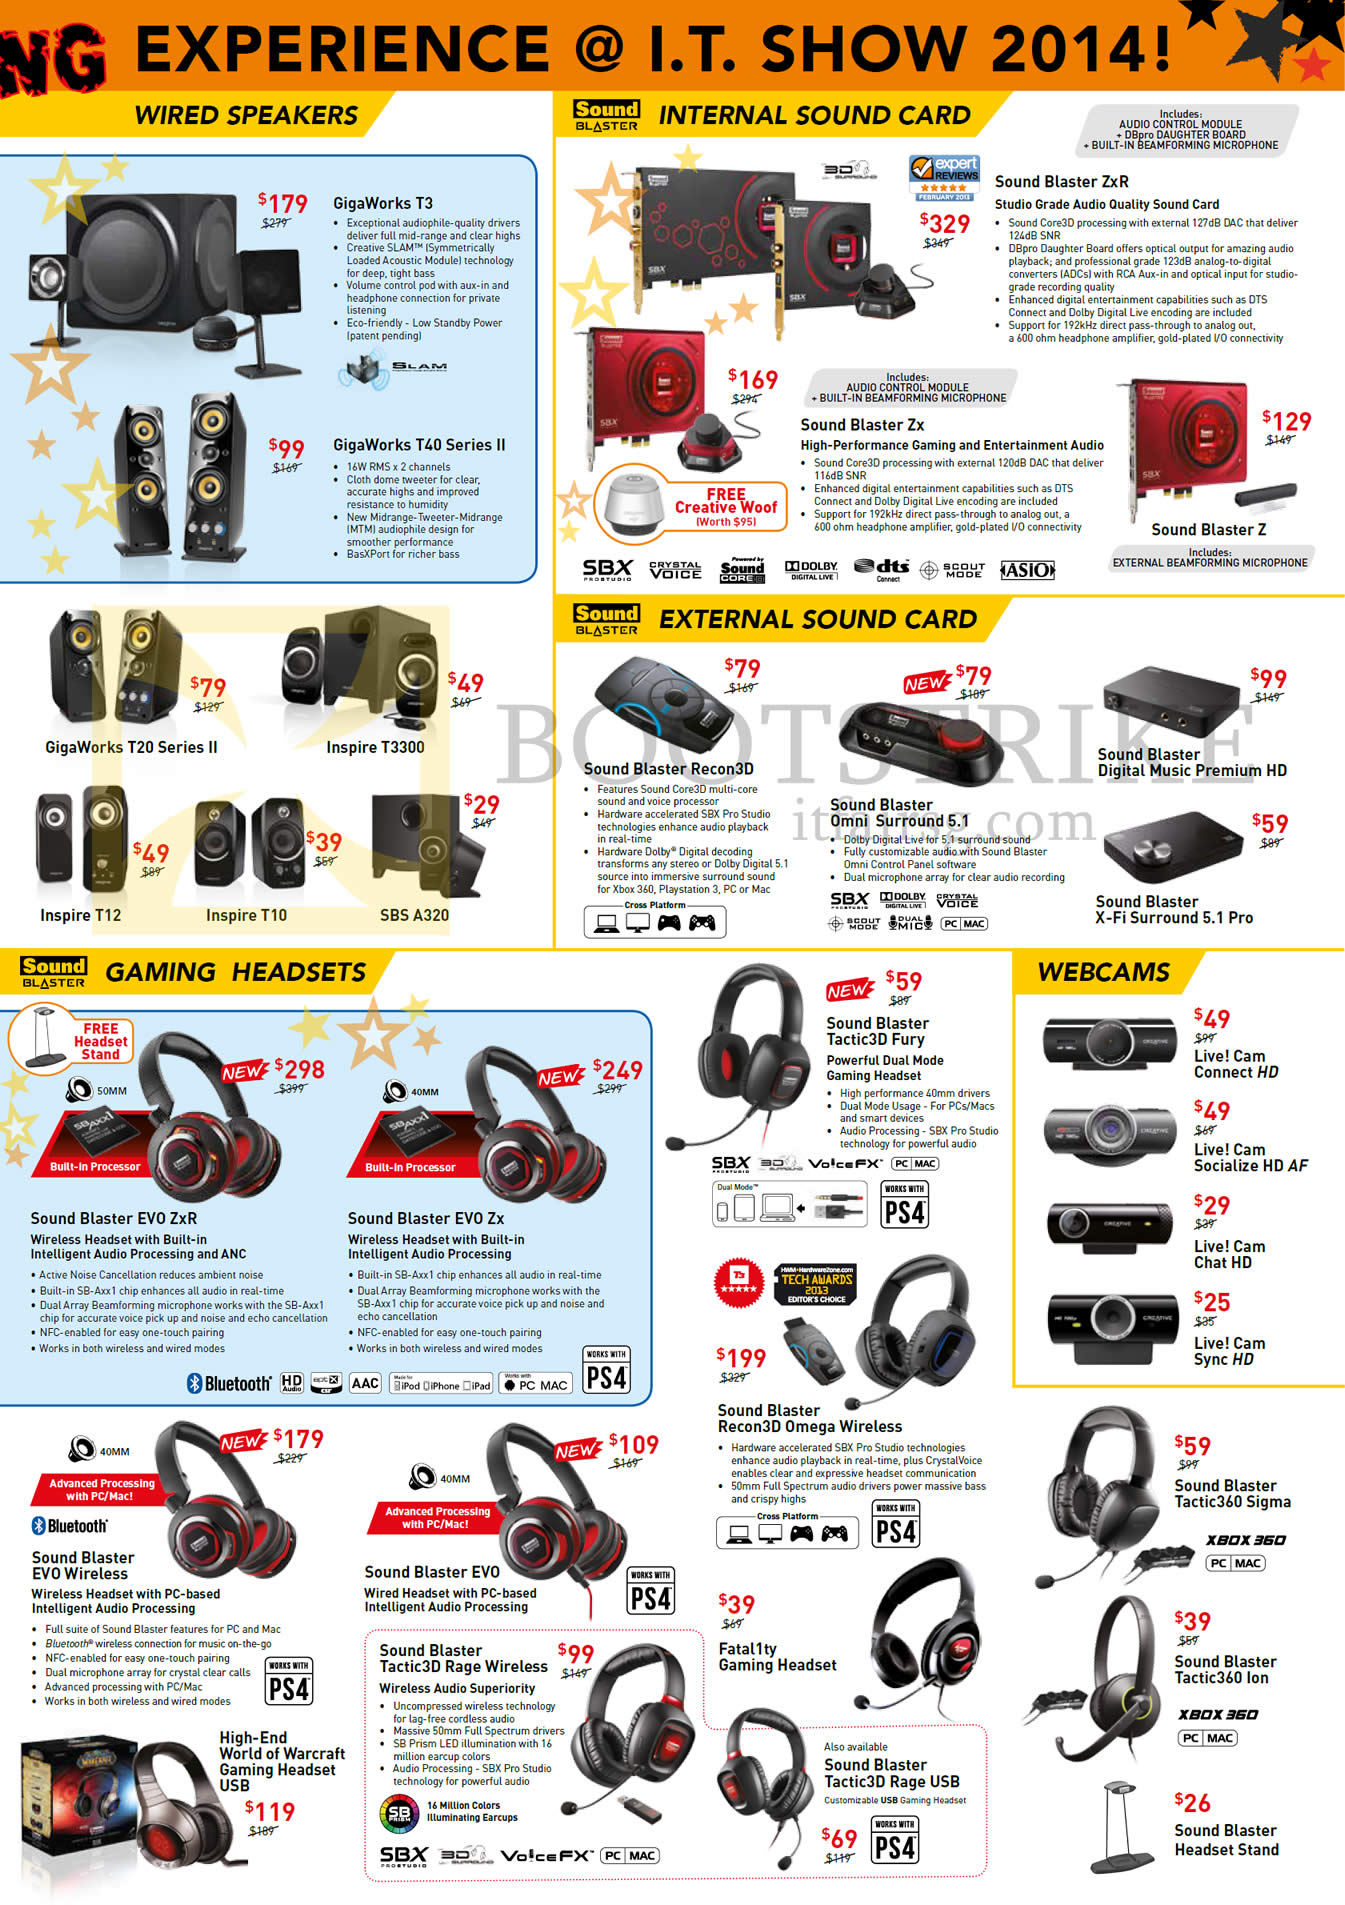 IT SHOW 2014 price list image brochure of Creative Speakers, Internal Sound Card, External Sound Card, Headsets, Webcam, Evo Tactic3D Fatal1ty Omni Zxr Sound Blaster GigaWorks Inspire SBS